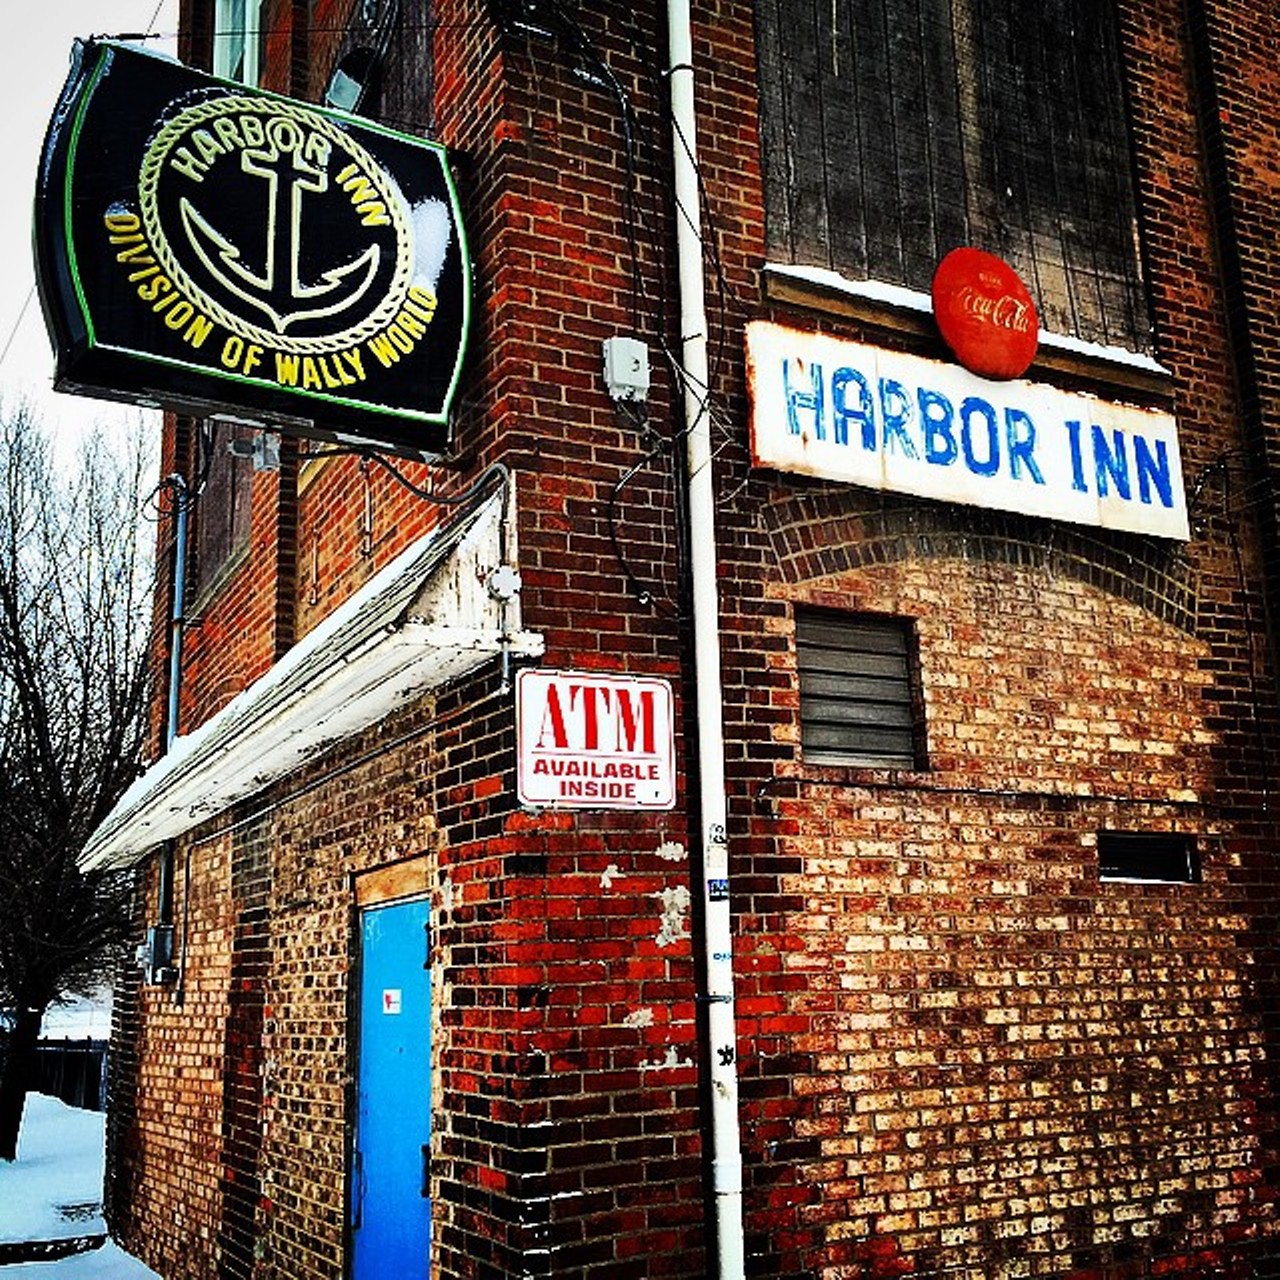  Drink at the Harbor Inn
It's Cleveland's oldest bar, which is reason enough to go there for a beer and a shot. But the Harbor Inn also remains one of Cleveland's best bars. Once populated by longshoremen and the blue-collar lot, the Harbor now serves those folks and many more.
Photo viajency312/Instagram